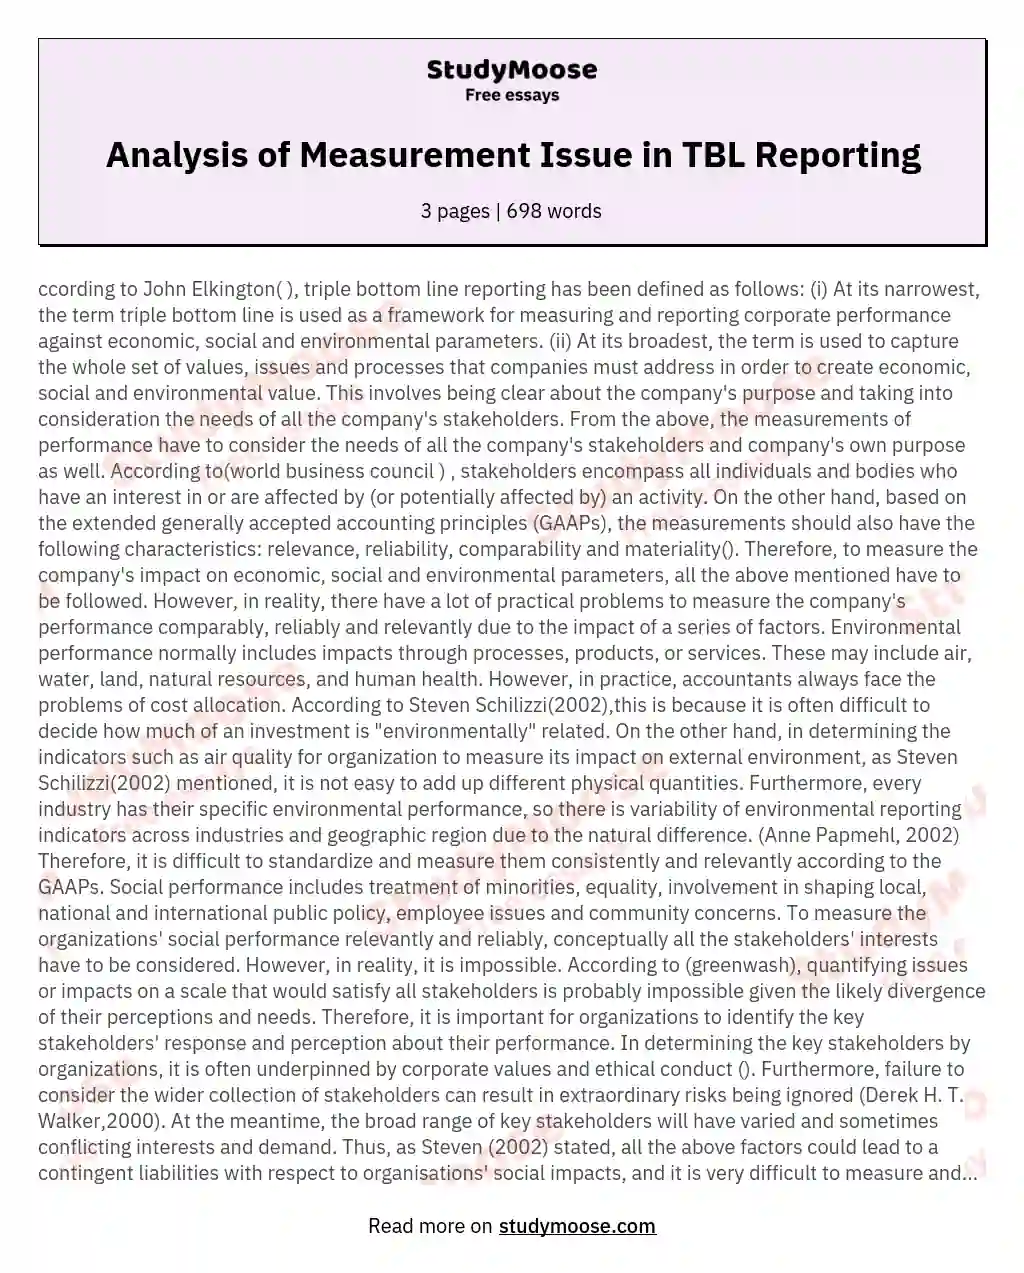 Analysis of Measurement Issue in TBL Reporting essay